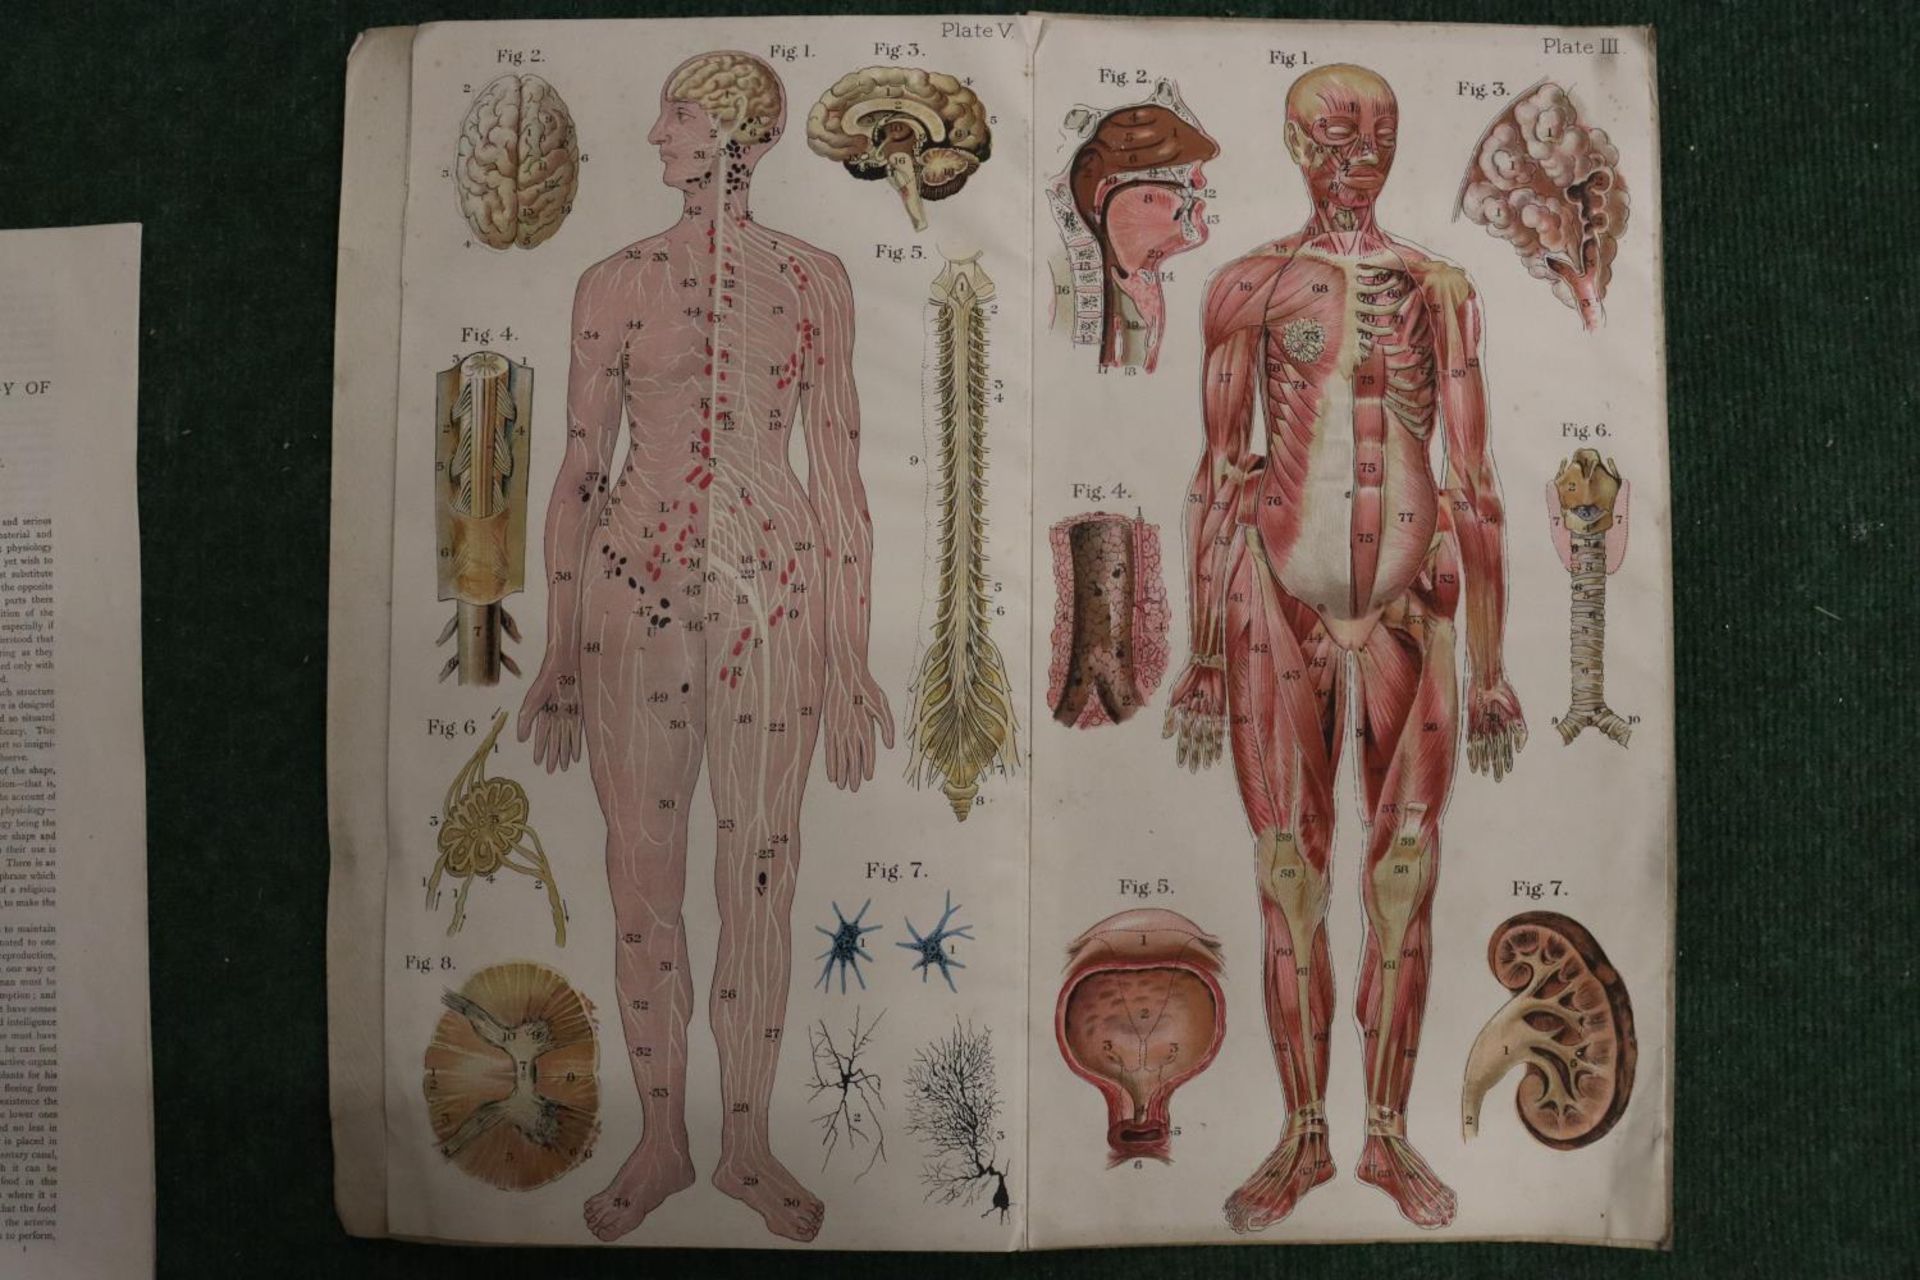 A VINTAGE BAILLIERE'S POPULAR ATLAS OF THE ANATOMY AND PHYSIOLOGY OF THE FEMALE HUMAN BODY BY HUBERT - Image 4 of 4